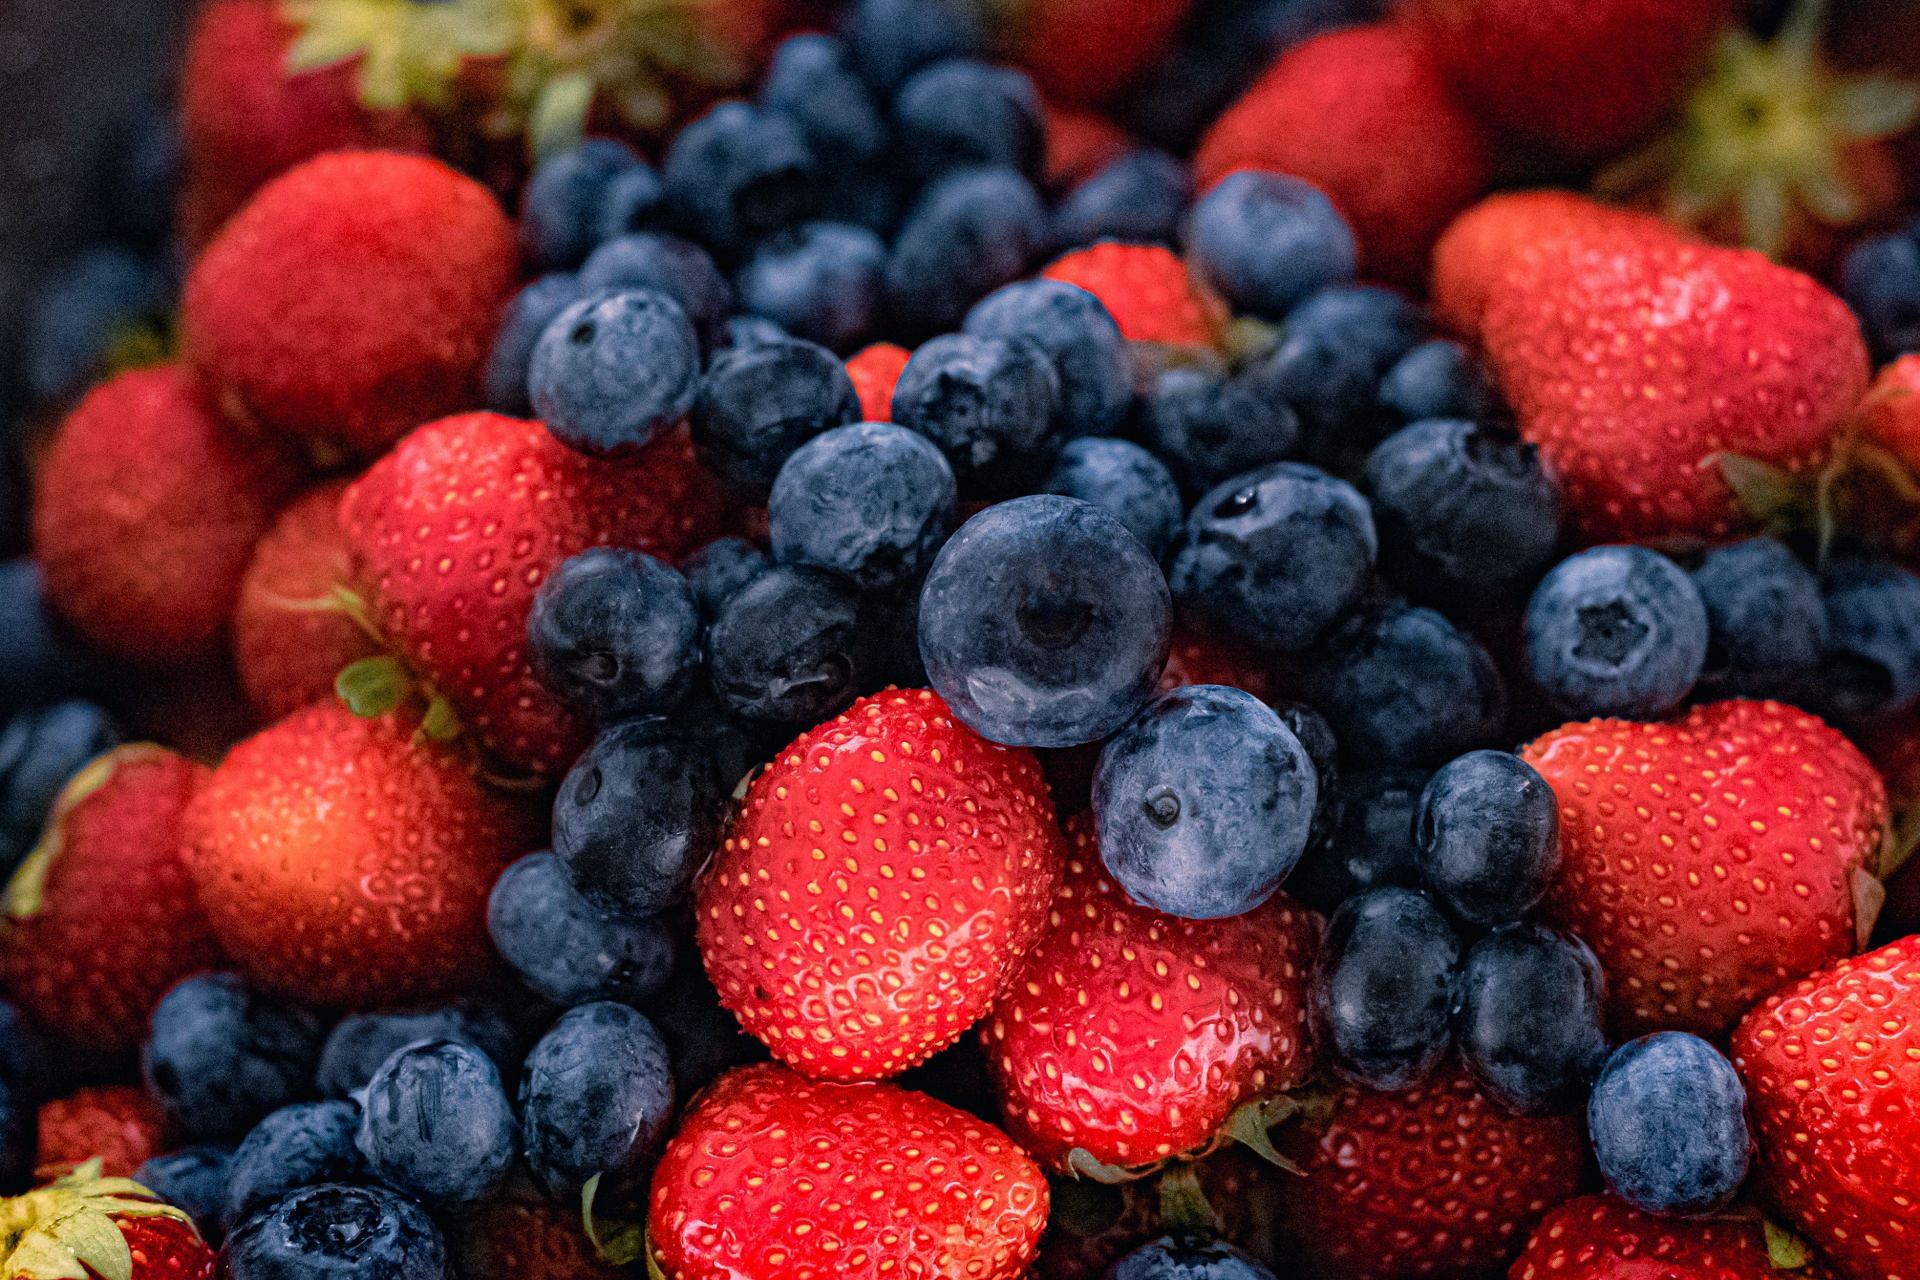 Berries are a tasty way of getting antioxidants in your body. (Image via Pexels/ Barbara Werner)